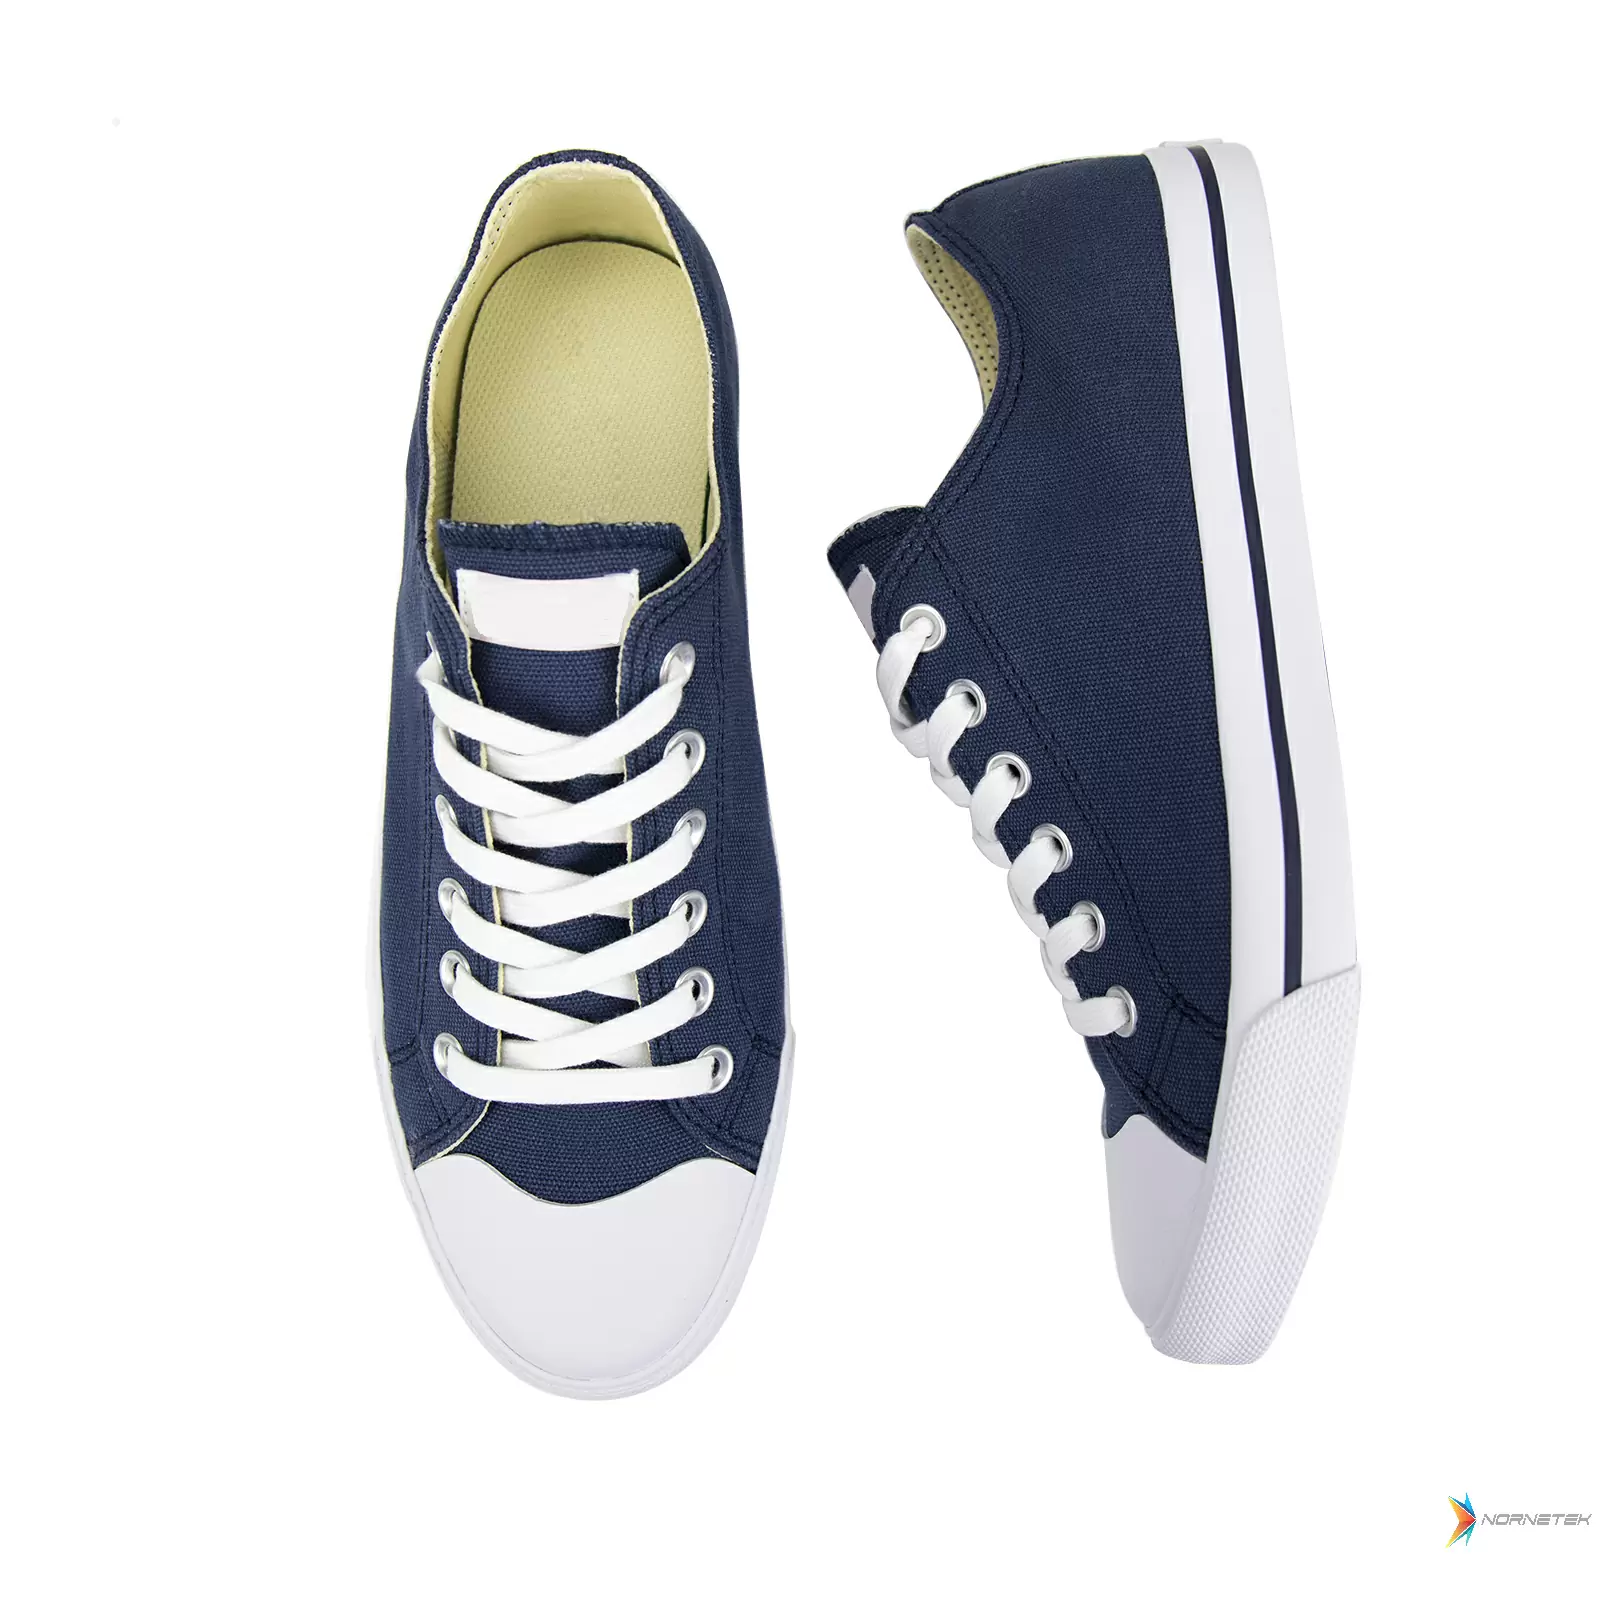 Canvas Sneakers Manufacturer